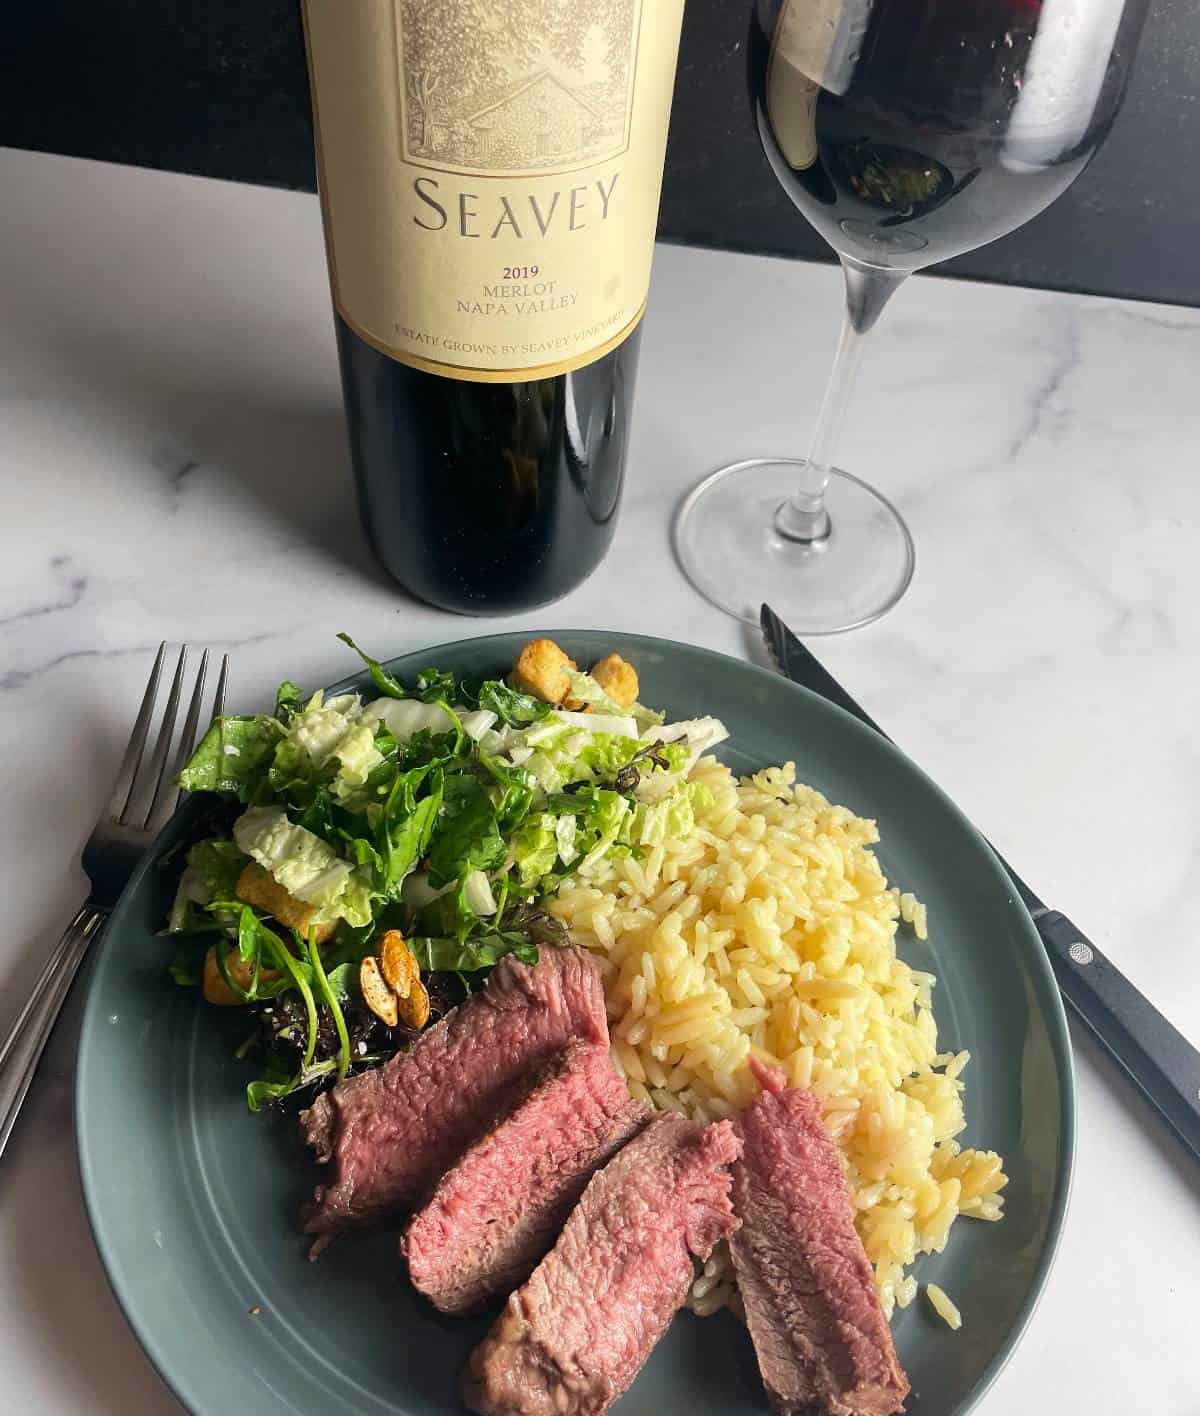 slices of steak served on a plate with rice and salad. Bottle of Merlot wine in the background.